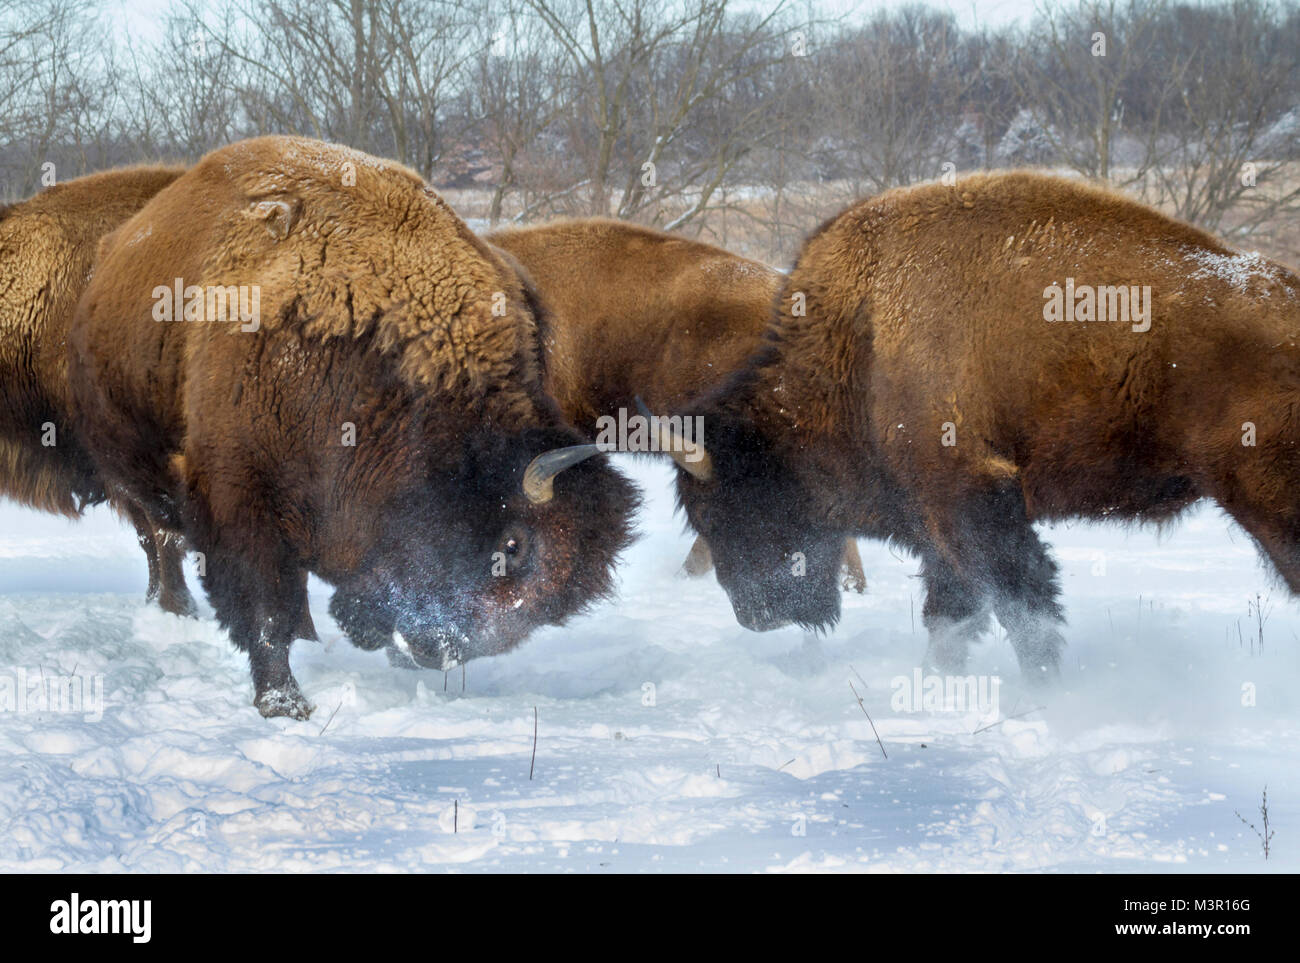 Males American bison (Bison bison) fighting on snow, Neal Smith National Wildlife Refuge, Iowa, USA Stock Photo